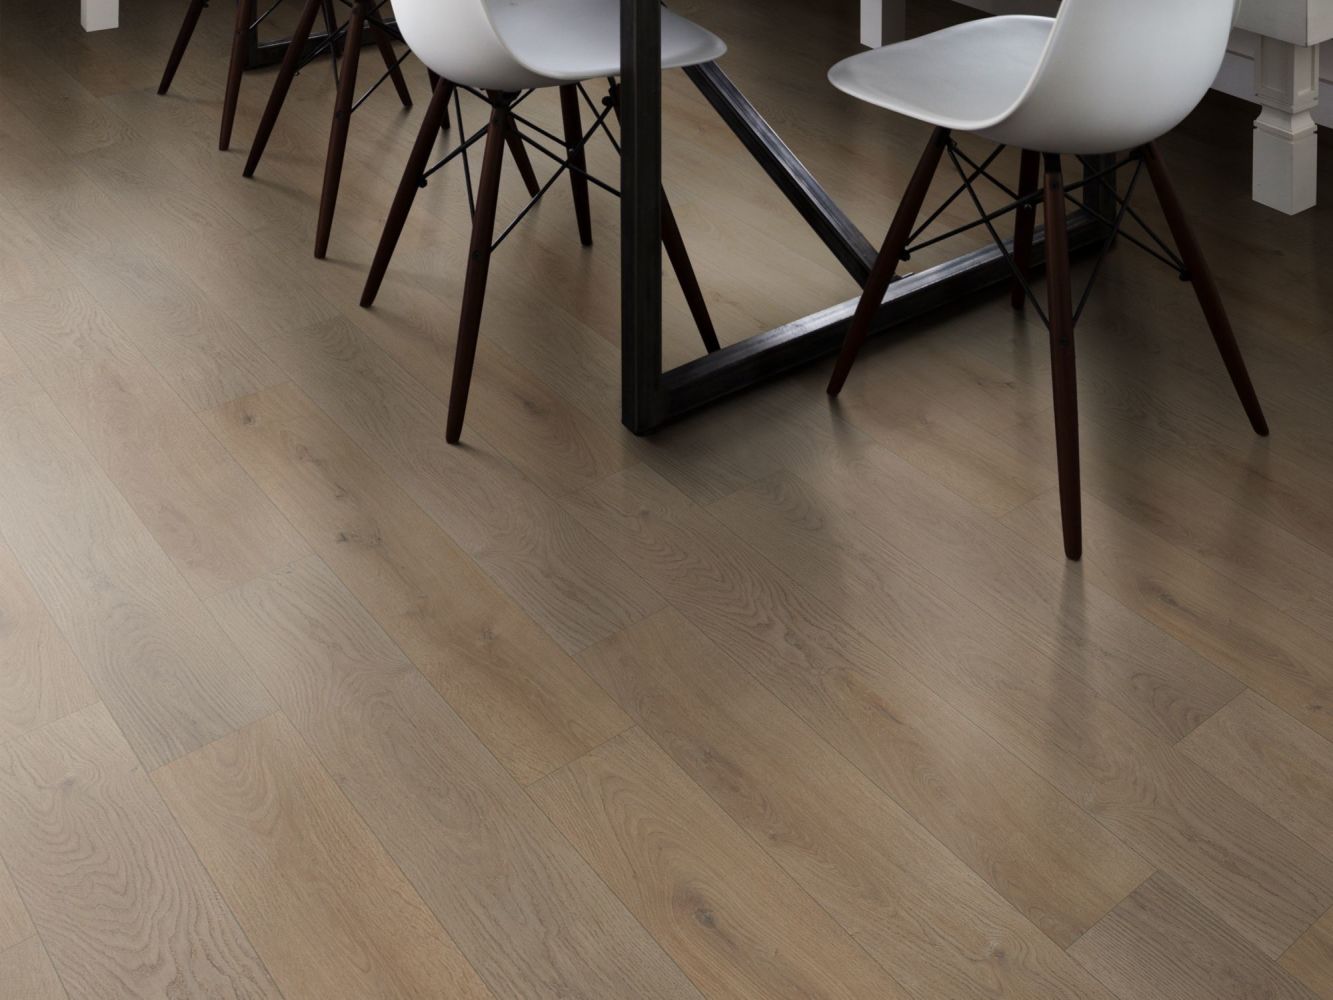 Shaw Floors Resilient Property Solutions Prominence Plus Crafted Oak 01089_VE381